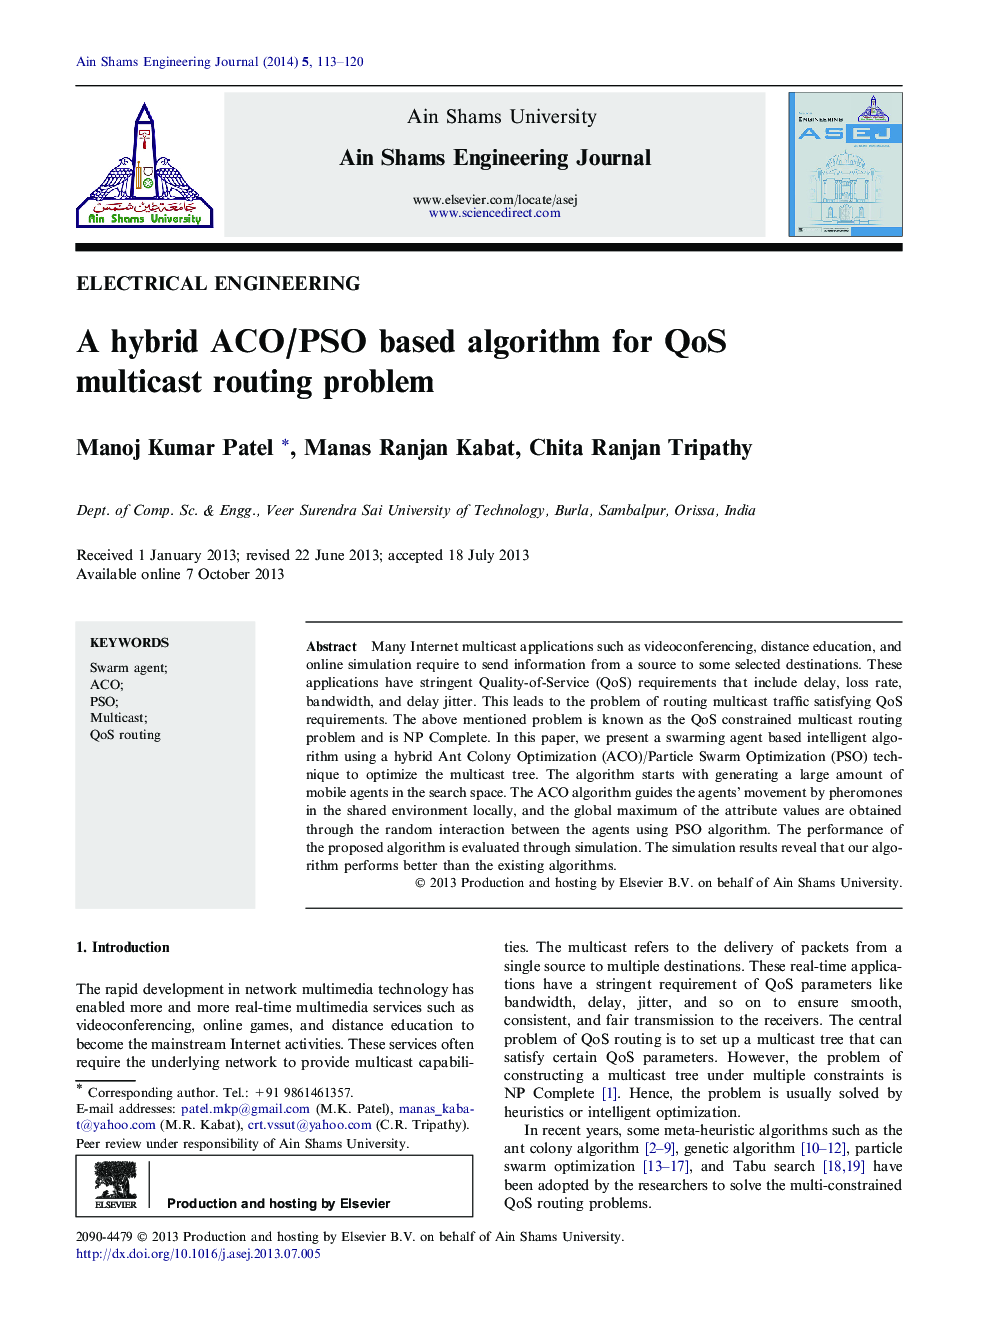 A hybrid ACO/PSO based algorithm for QoS multicast routing problem 